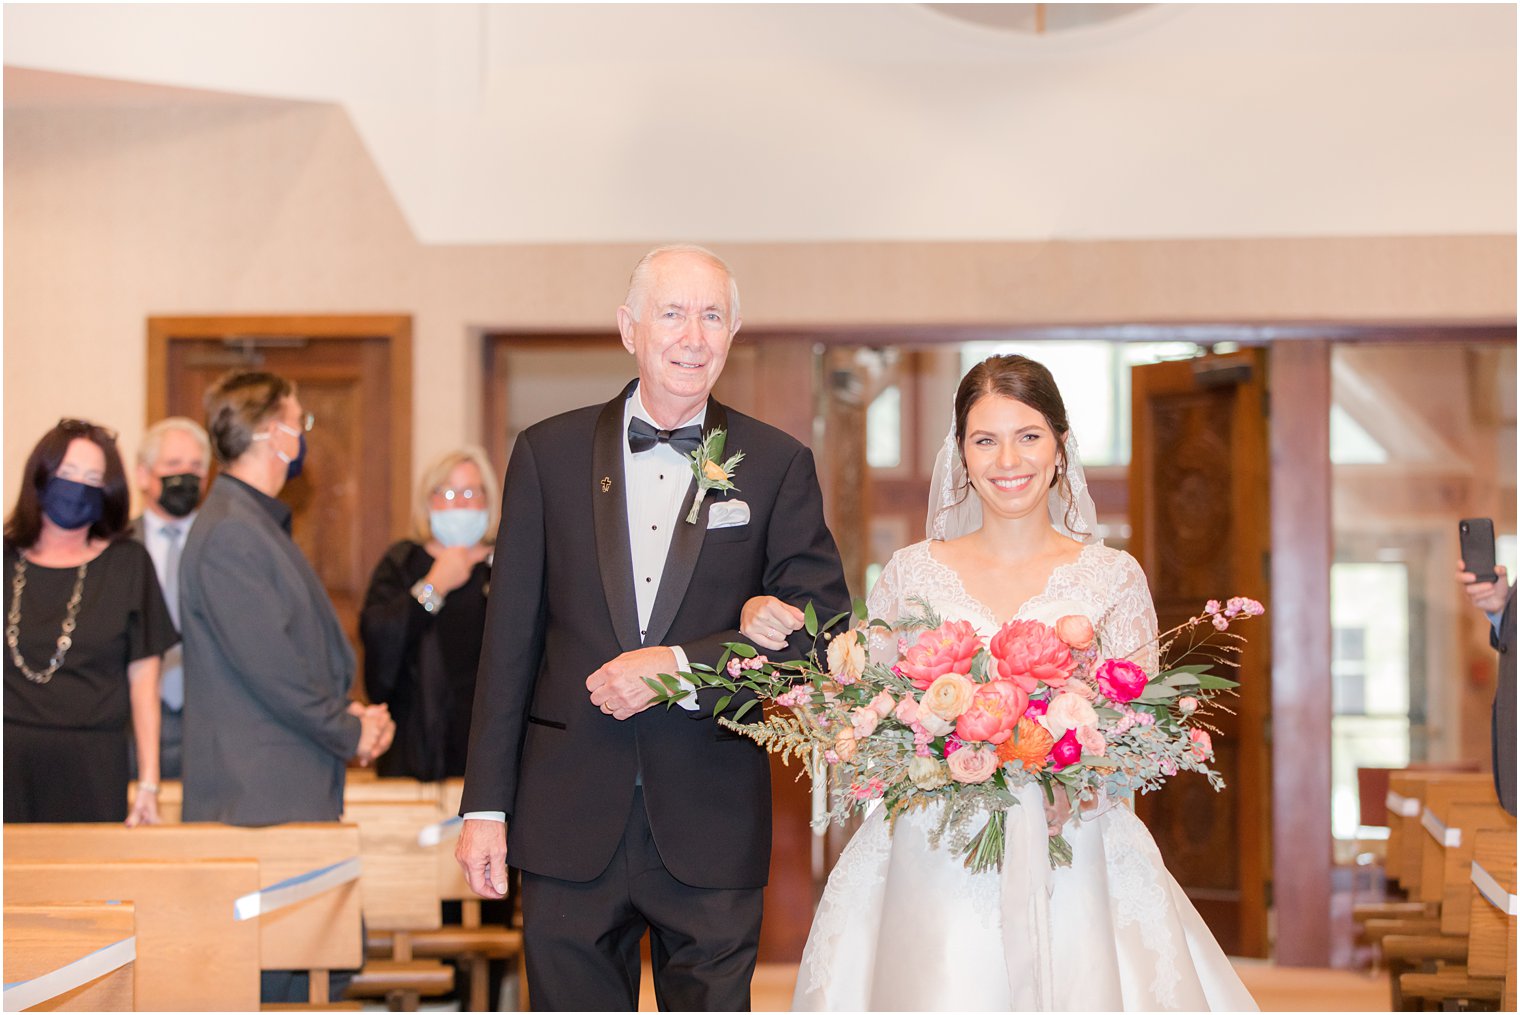 bride walks down aisle with dad during traditional wedding ceremony in New Jersey